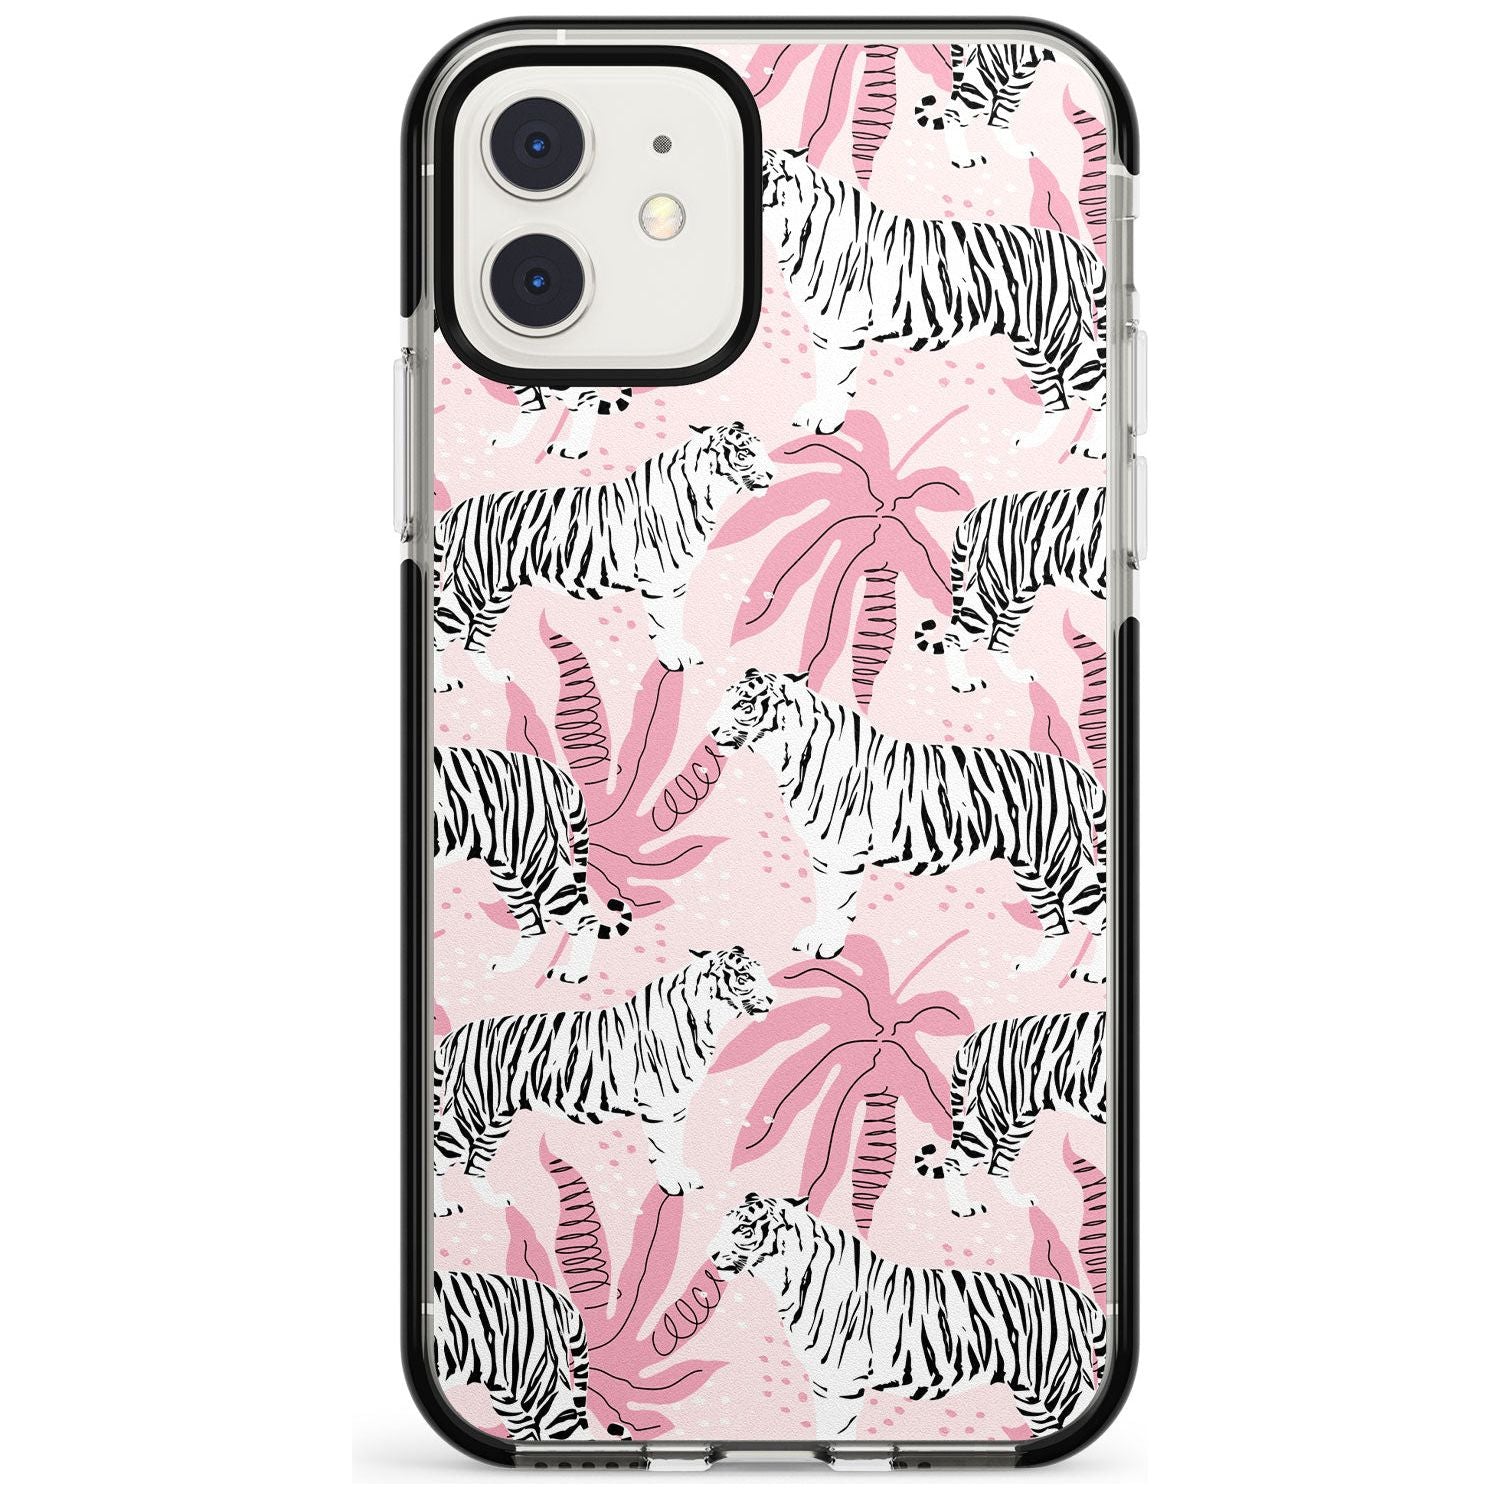 White Tigers on Pink Pattern Black Impact Phone Case for iPhone 11